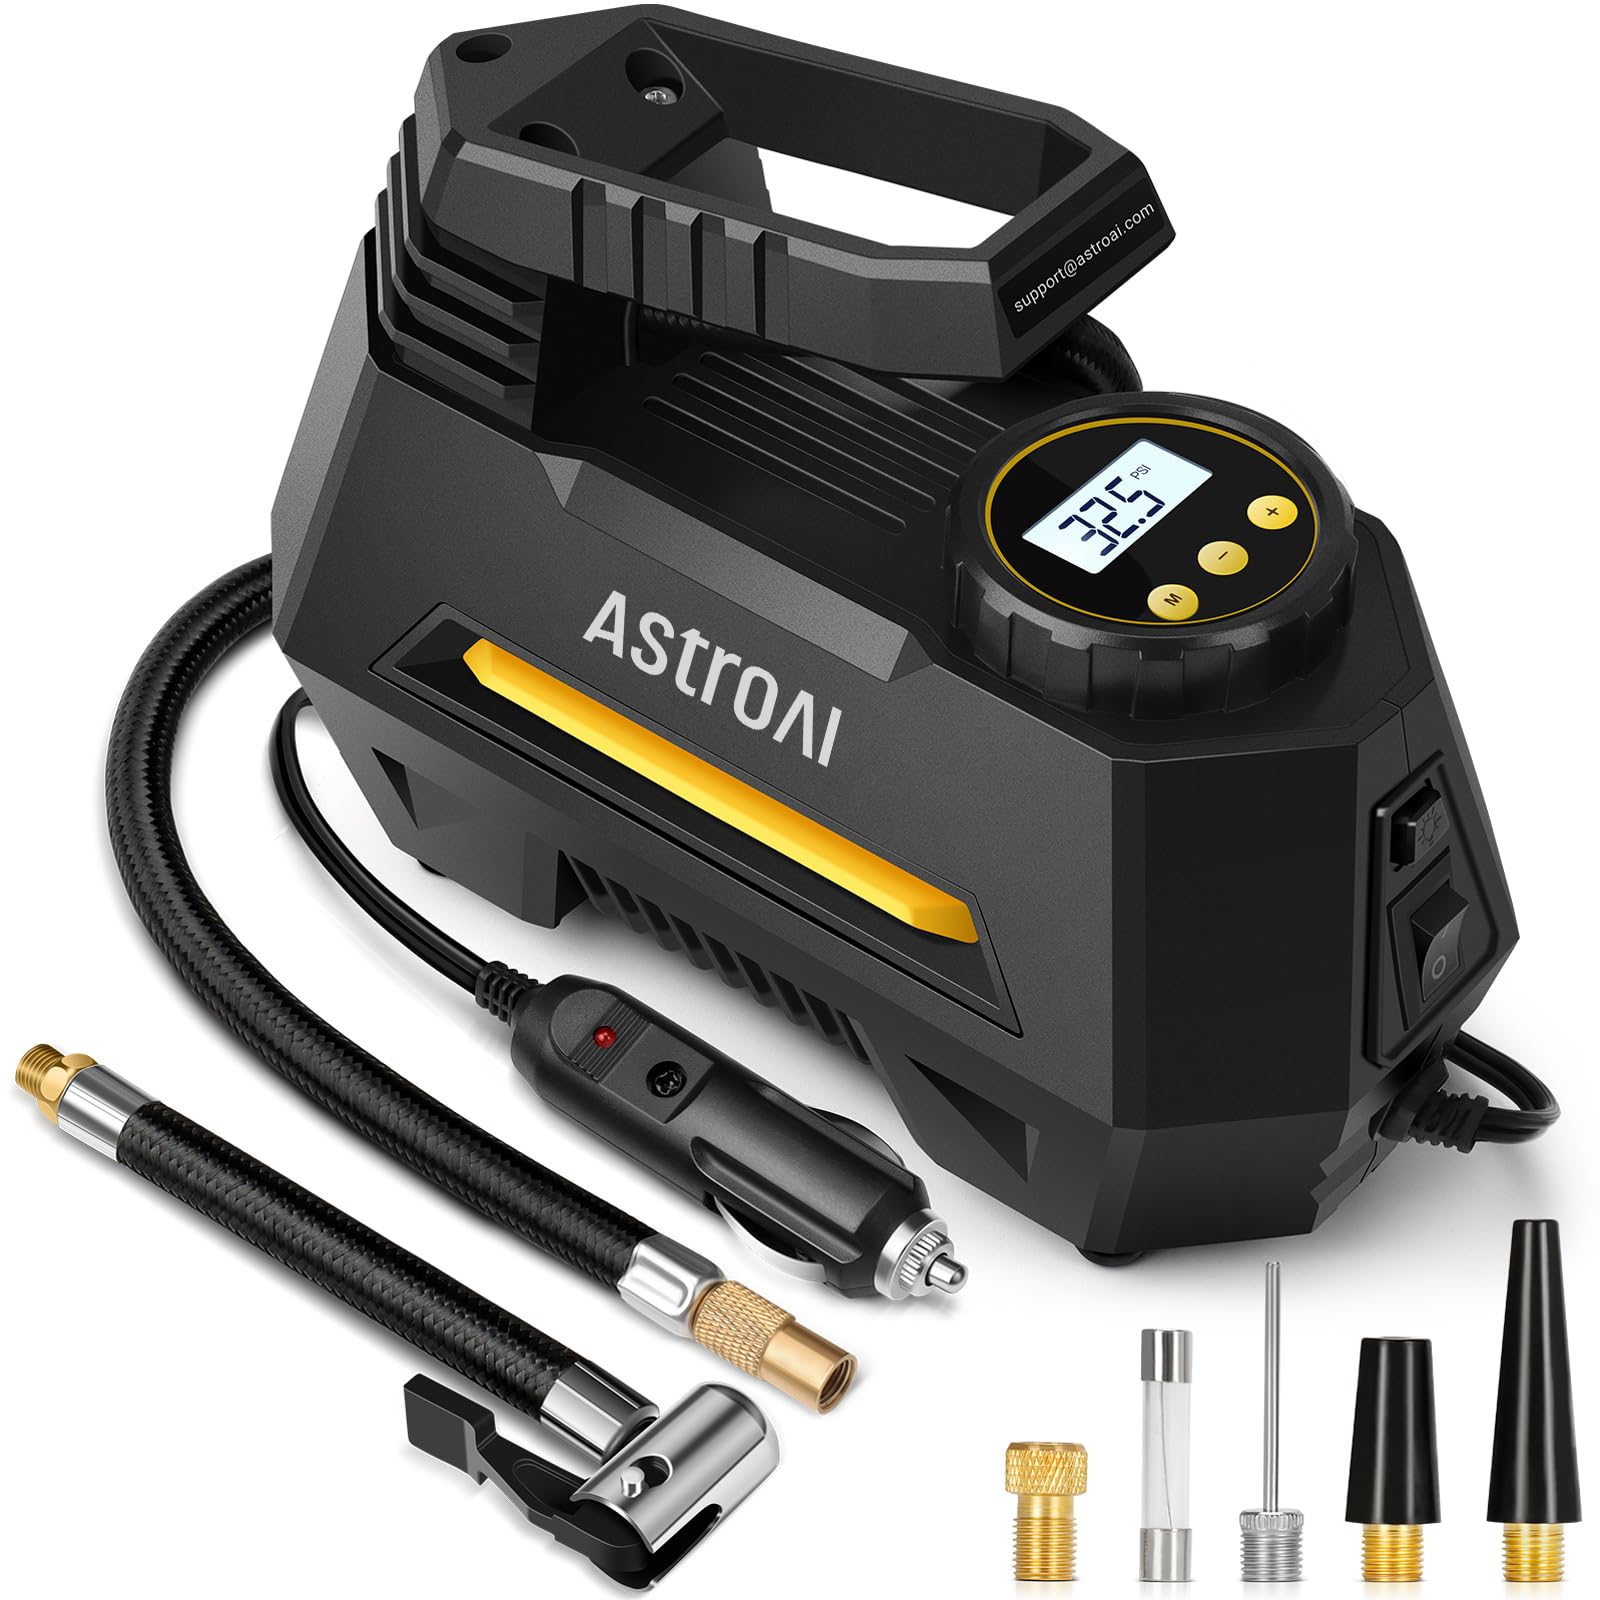 AstroAI Tire Inflator Portable Air Compressor Air Pump for Car Tires - 12V DC Auto Pump with Digital Pressure Gauge, 100PSI with Emergency LED Light